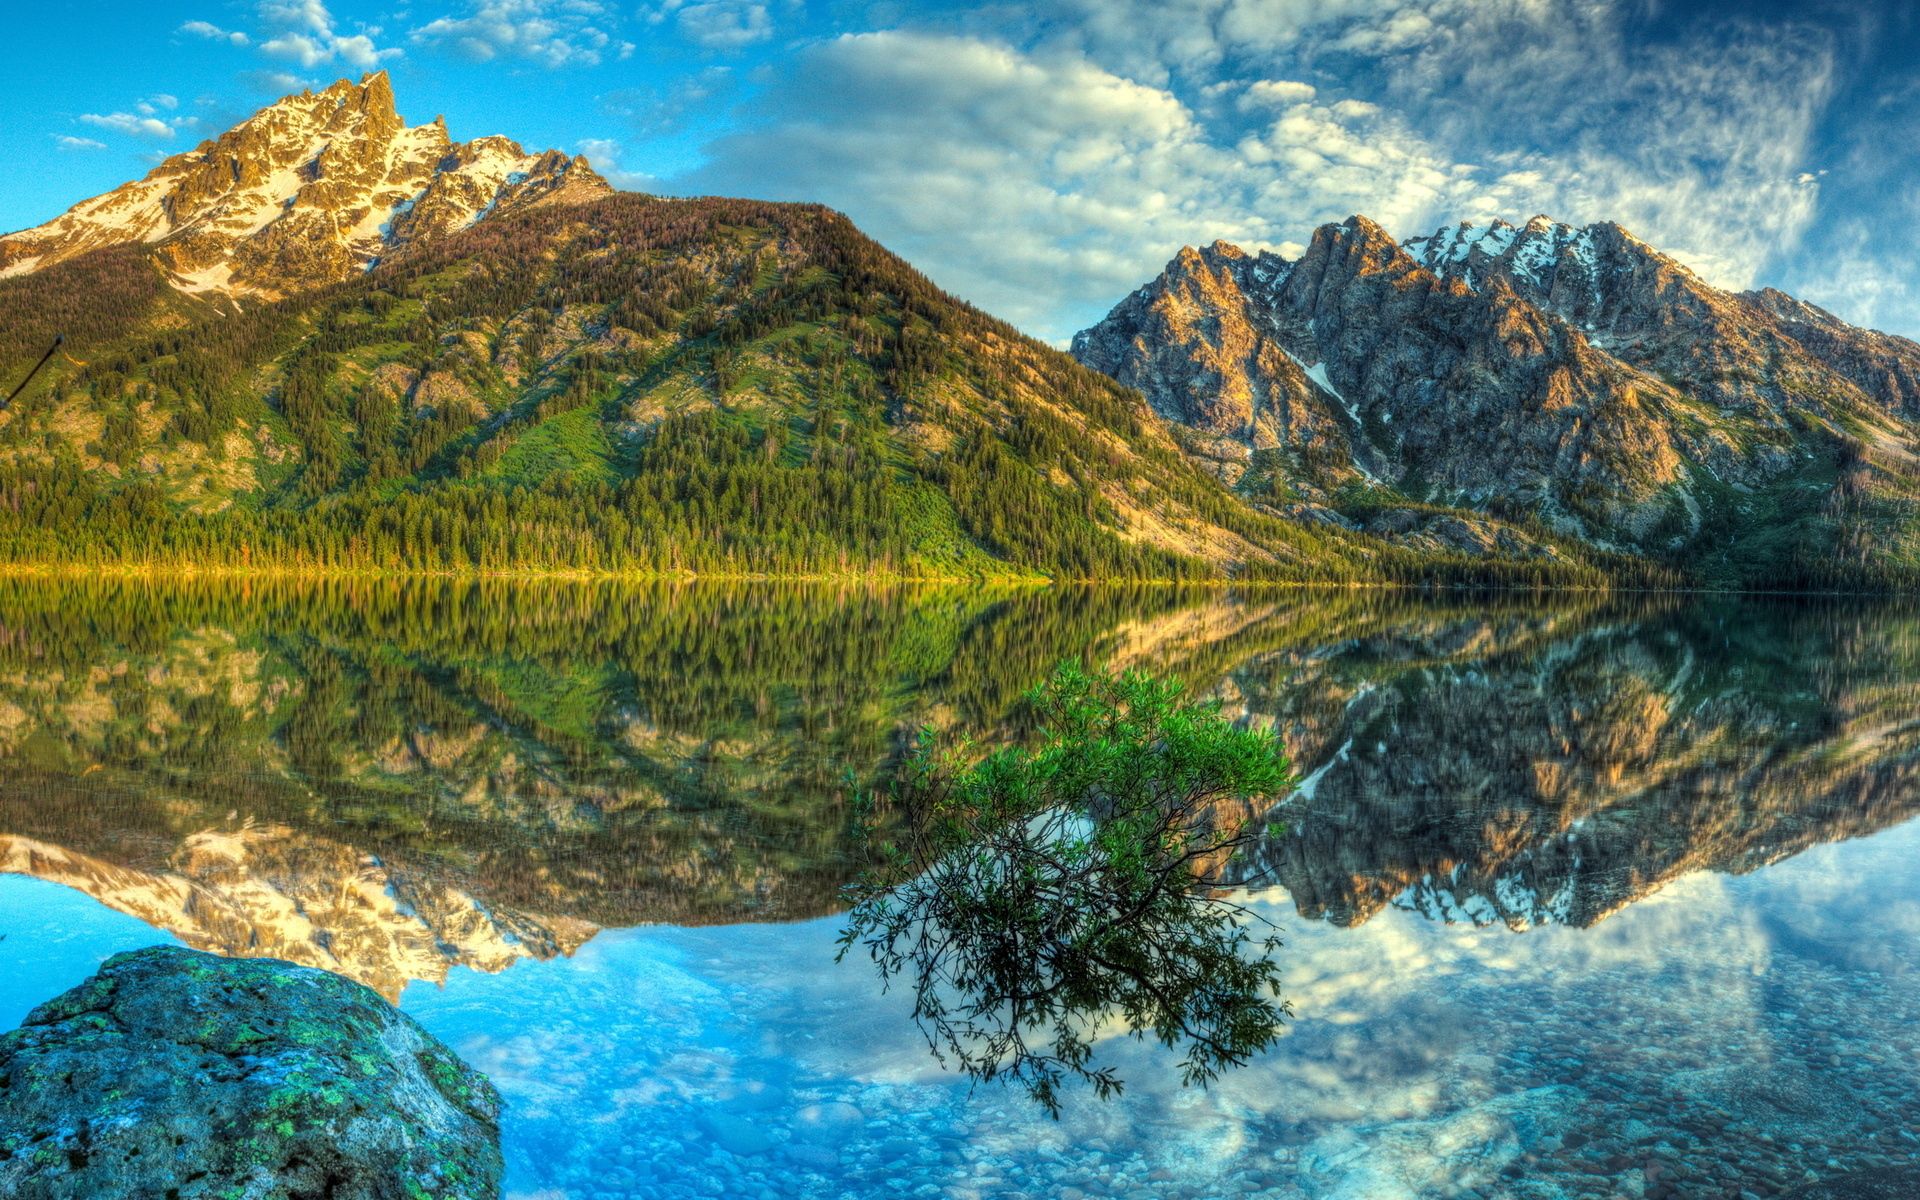 mountains, nature, sky, clouds, bush, lake, reflection, brightly, mirror